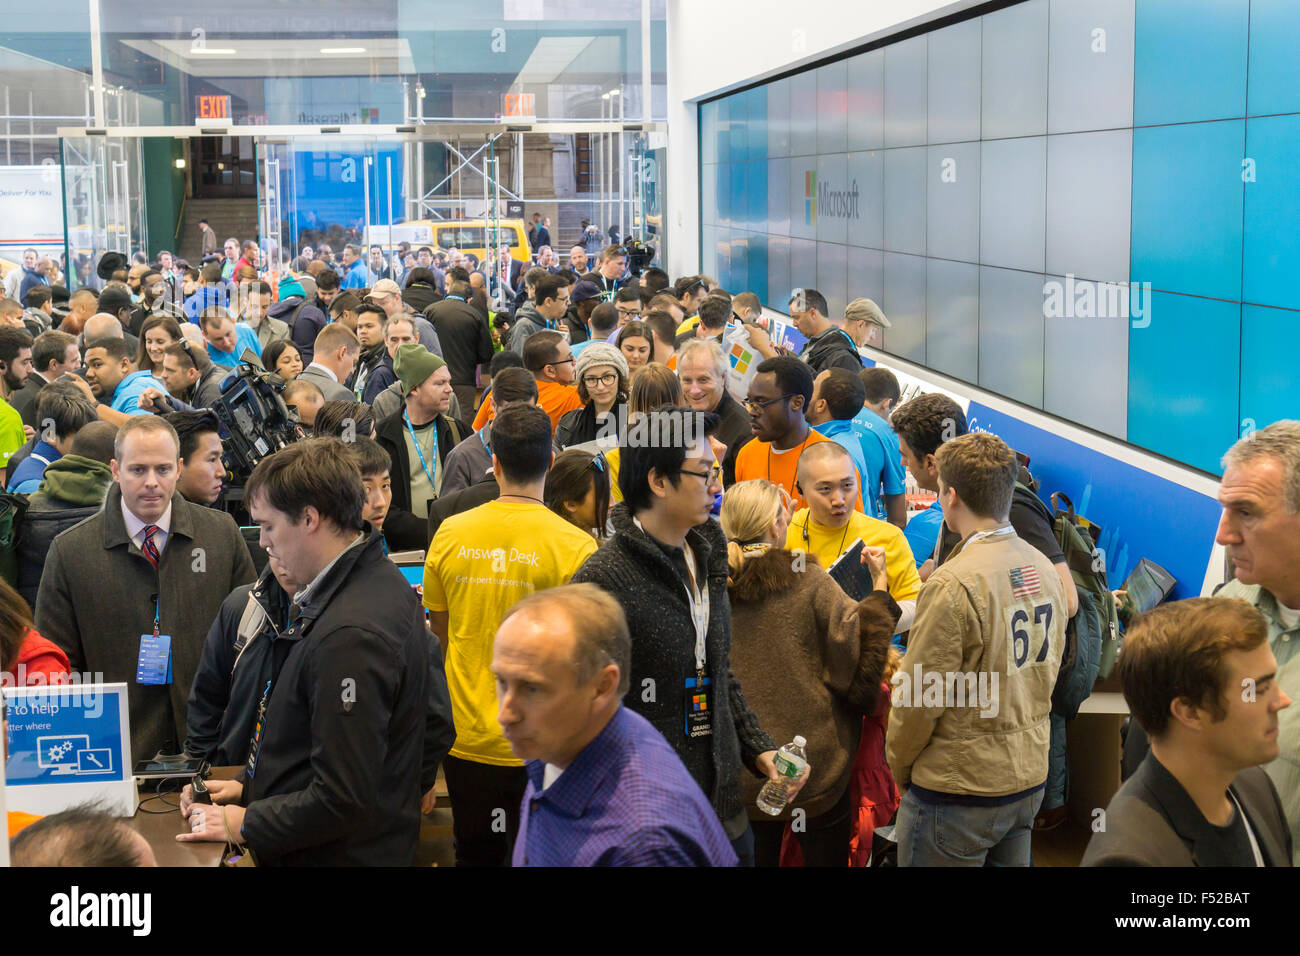 New York, USA. 26th October, 2015. Shoppers crowd the Microsoft flagship store on Fifth Avenue in New York at its grand opening, Monday, October 26, 2015. Visitors browsed Surface laptops, Xboxes and other products from Microsoft and other manufacturers. This is the 113th Microsoft store , it's largest at 22,000 square feet and the only one of two that is not situated in a mall. Credit:  Richard Levine/Alamy Live News Stock Photo